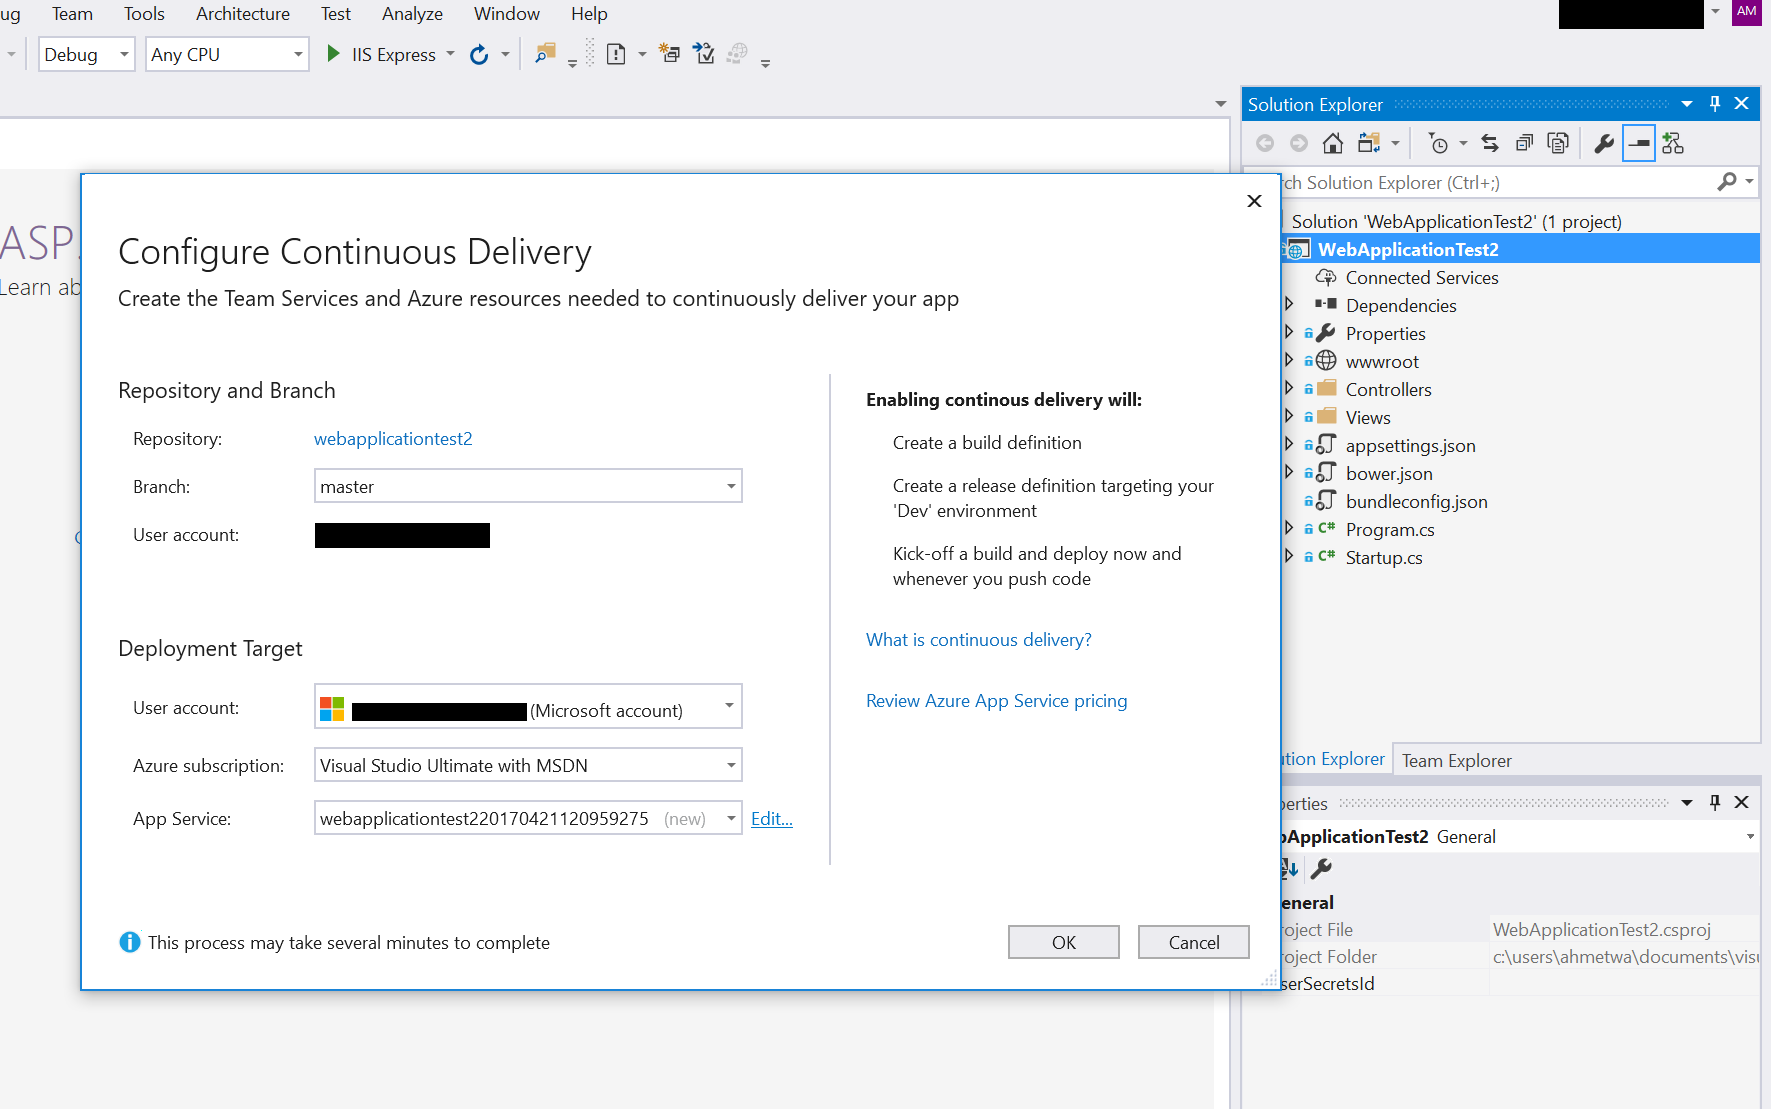 Azure Subscriptions and App Services